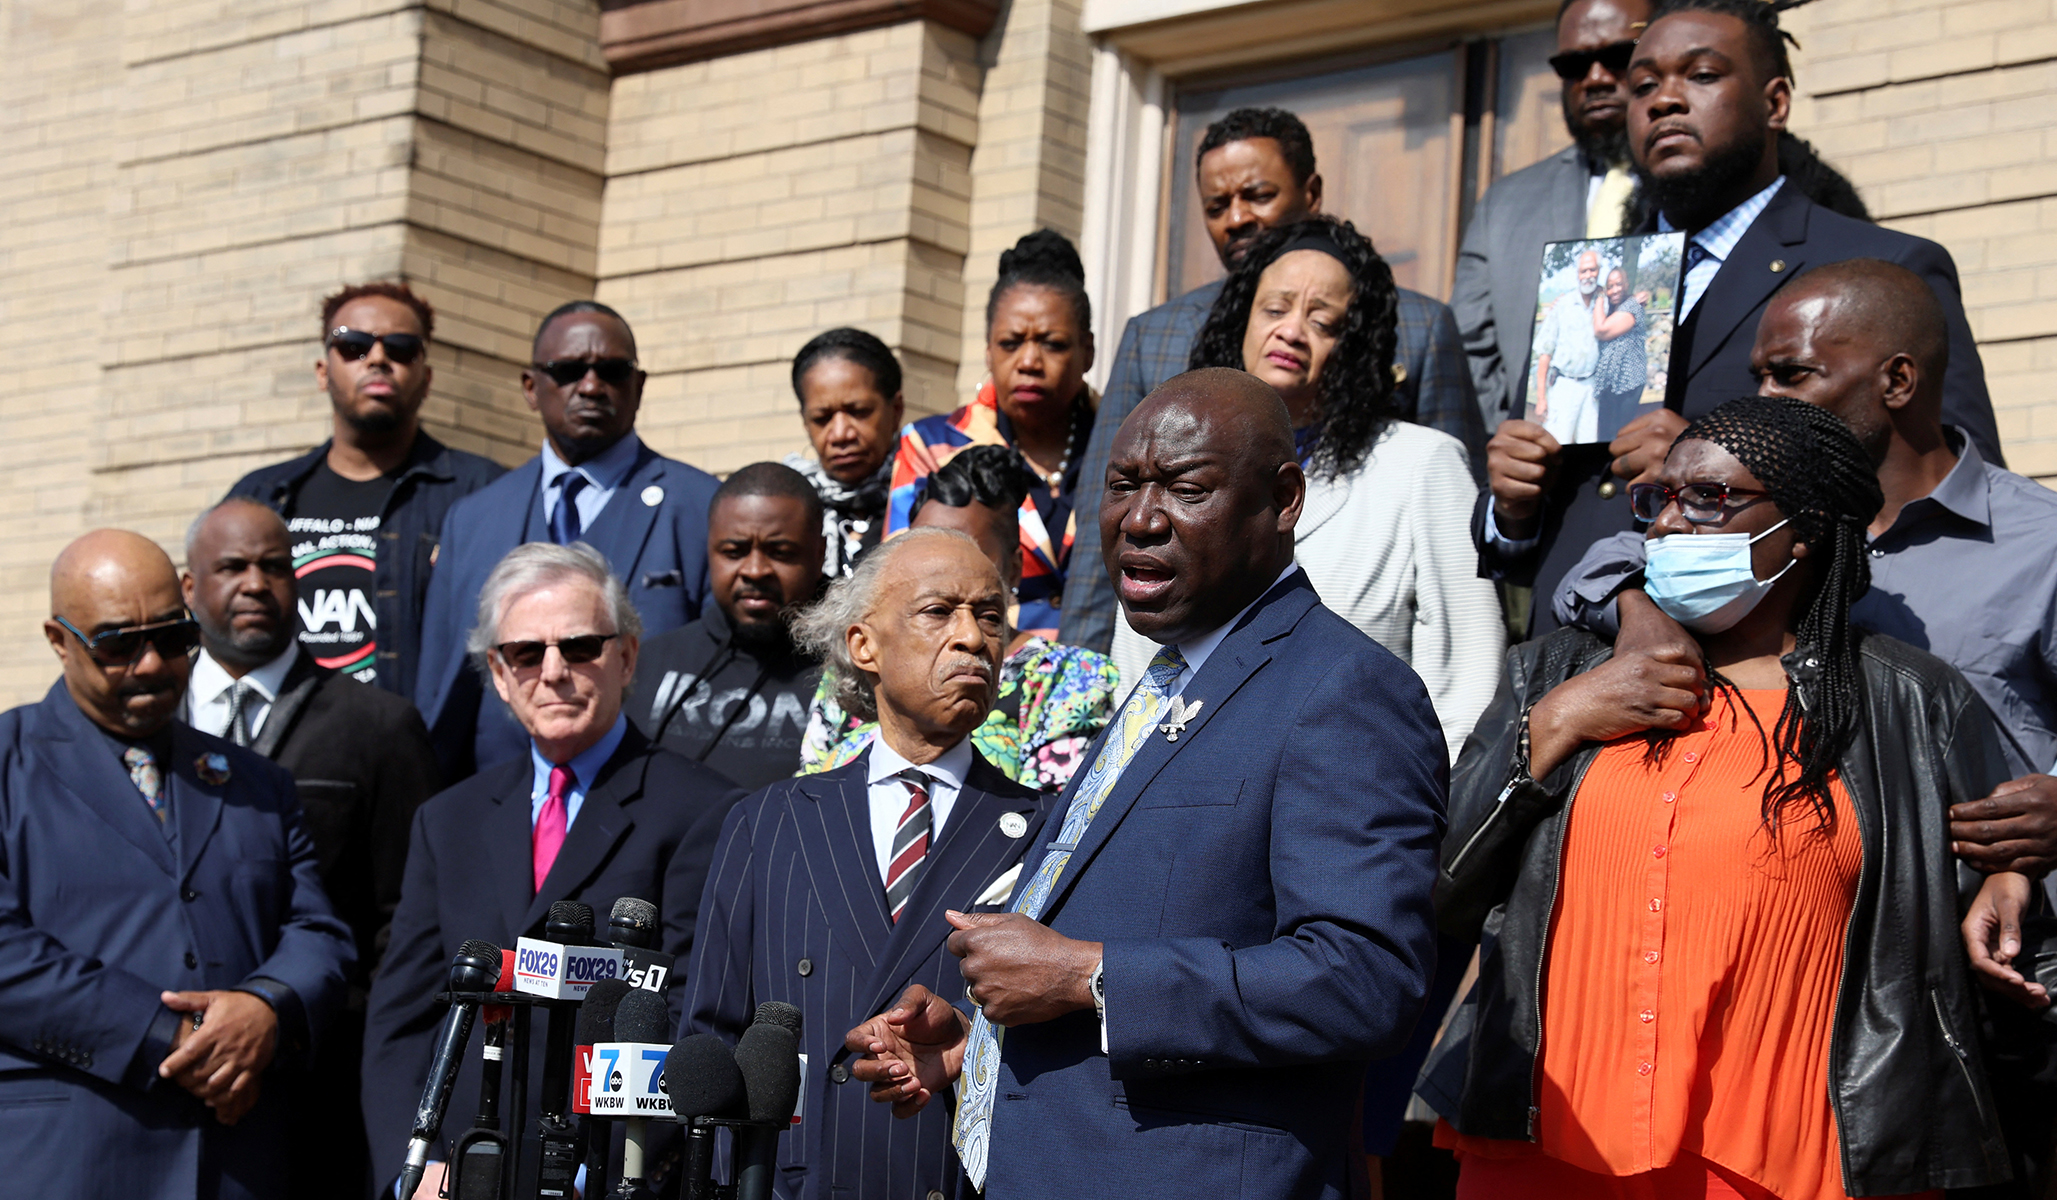 Attorney Ben Crump Plans to Sue ‘Anybody Who Was an Accomplice’ to Buffalo Supermarket Shooter